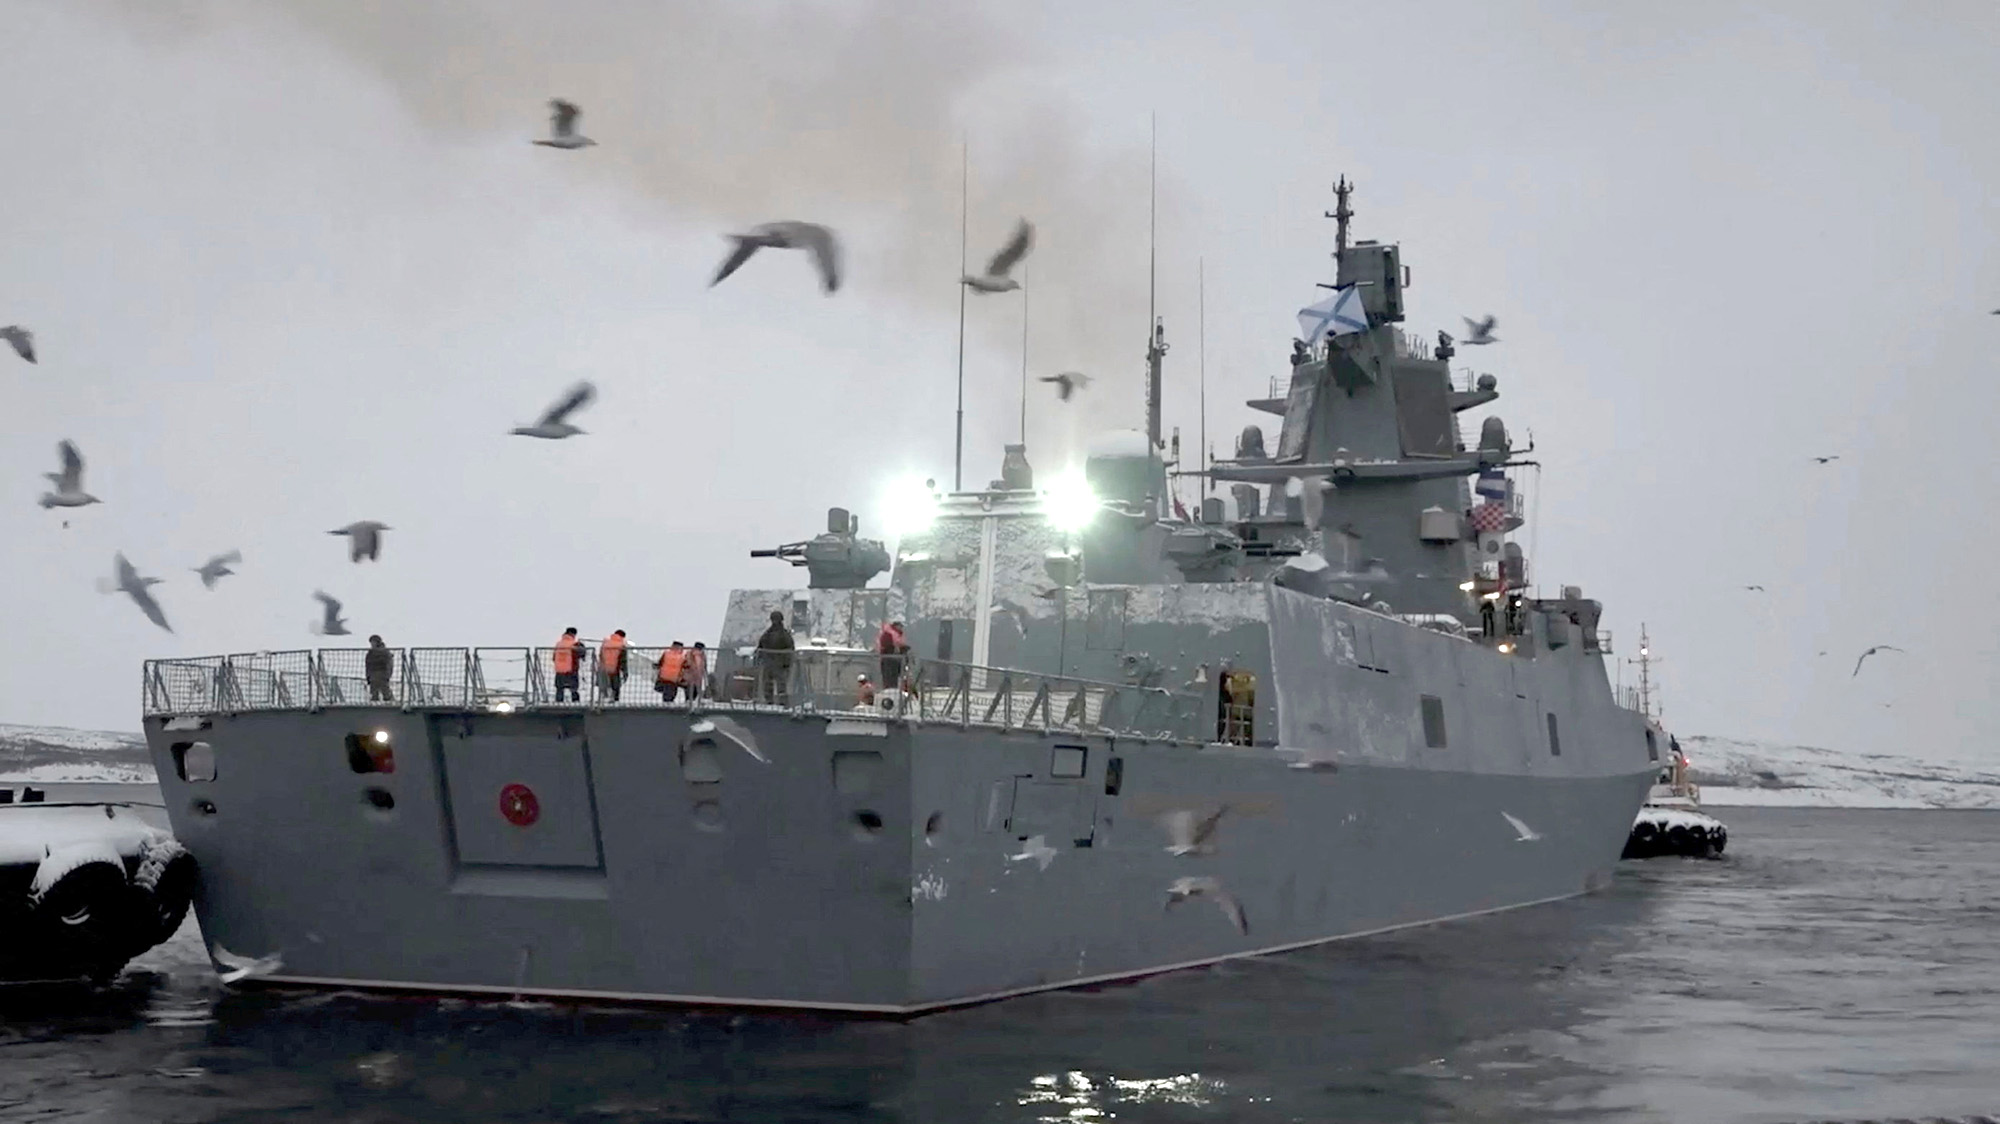 The Russian frigate 'Admiral Gorshkov', armed with Zircon hypersonic weapons, leaves the naval base in Severomorsk, Russia, in this still image taken from video released on January 4, 2023. 